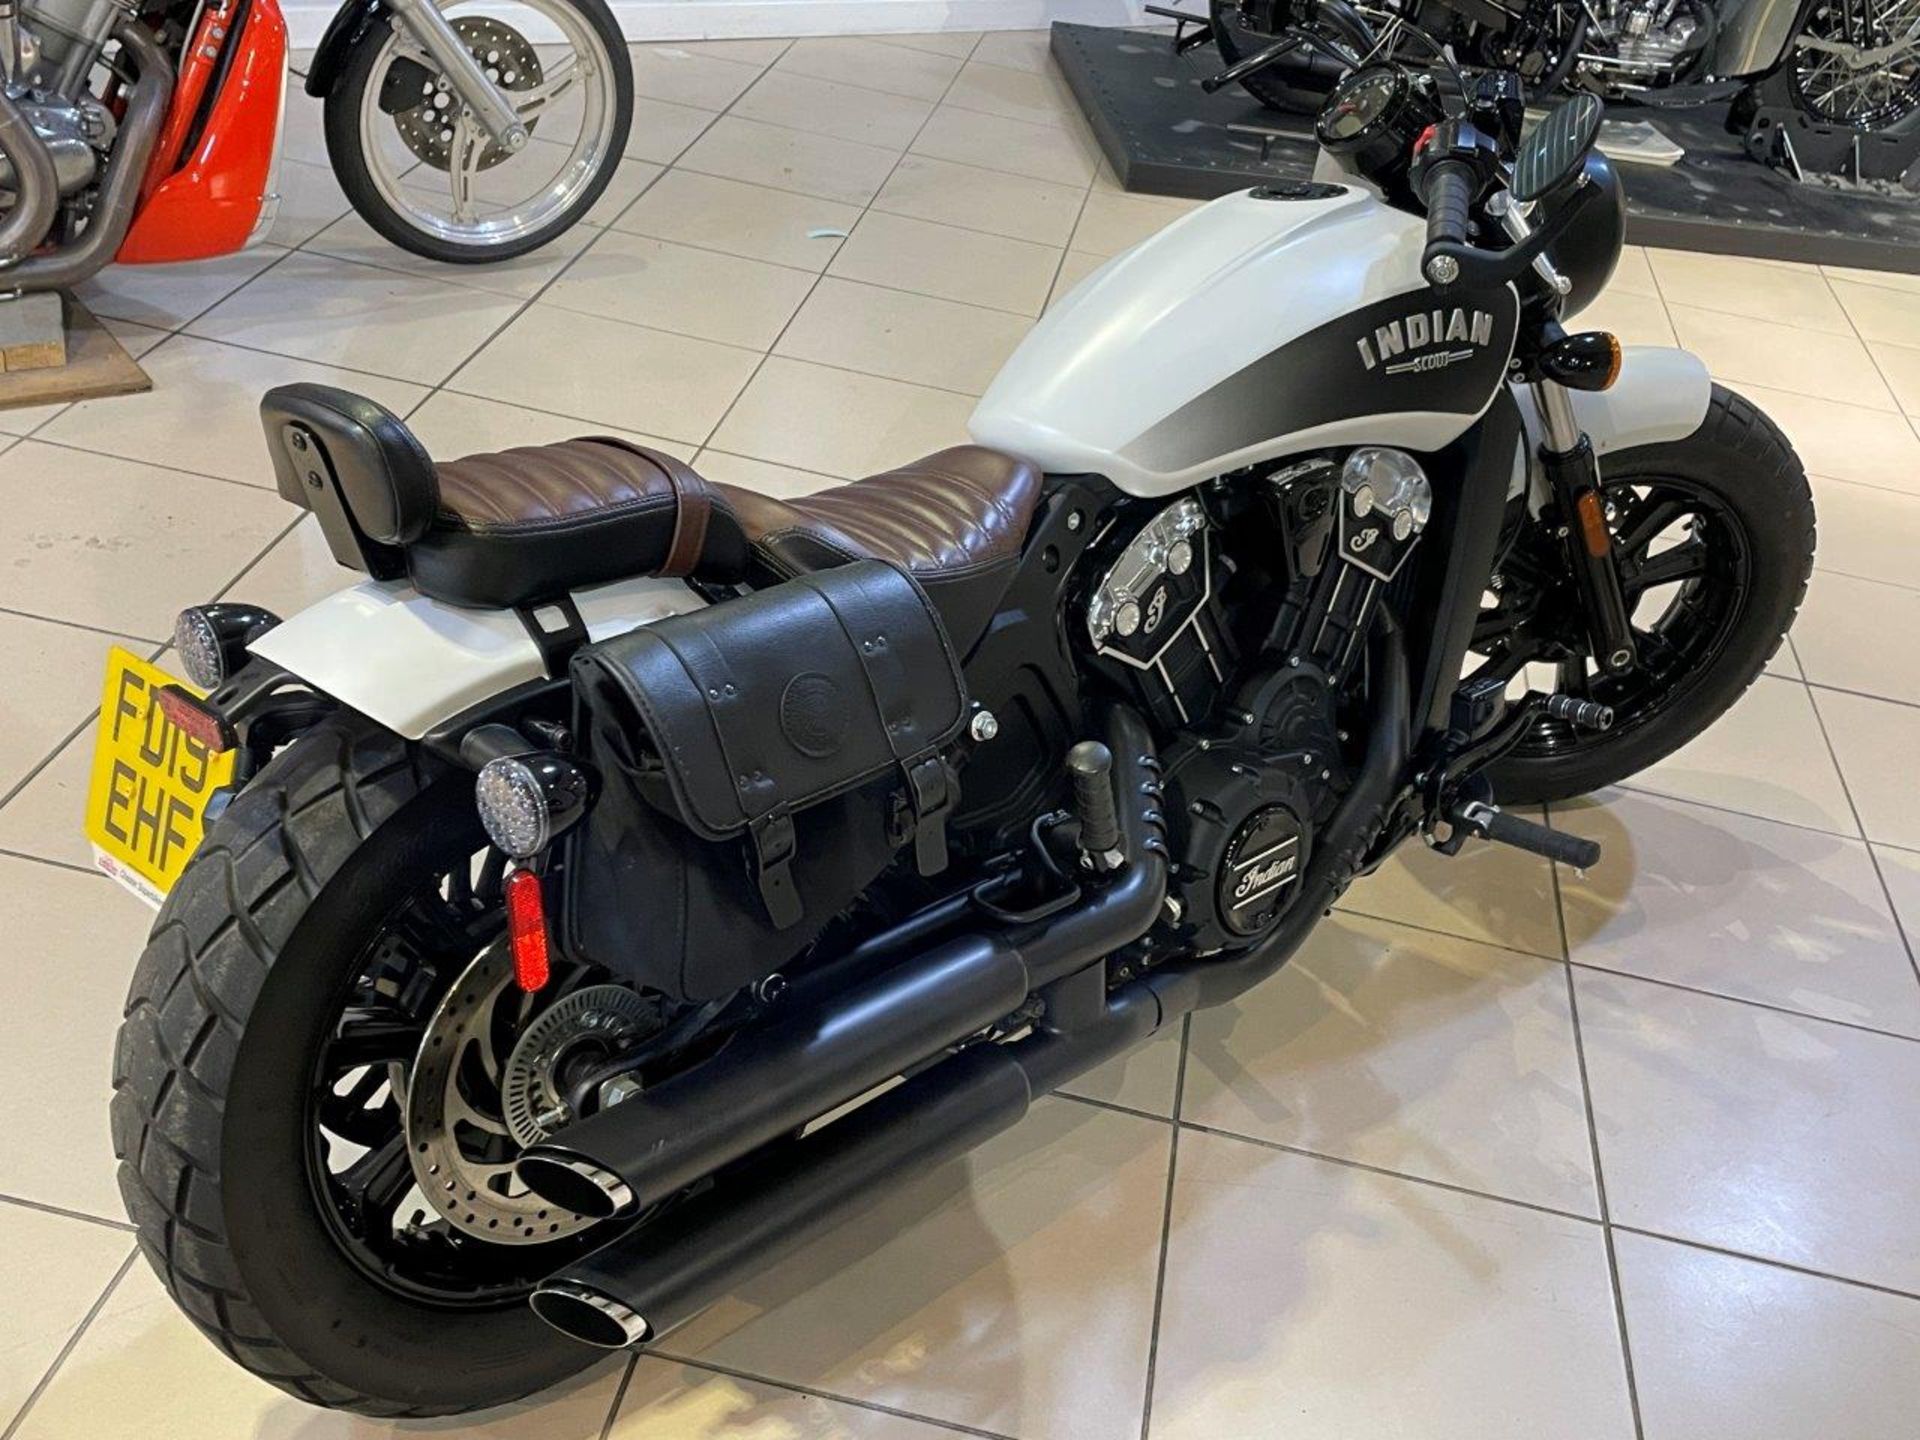 Indian Motorcycles Scout Bobber Motorbike (May 2019) - Image 4 of 18